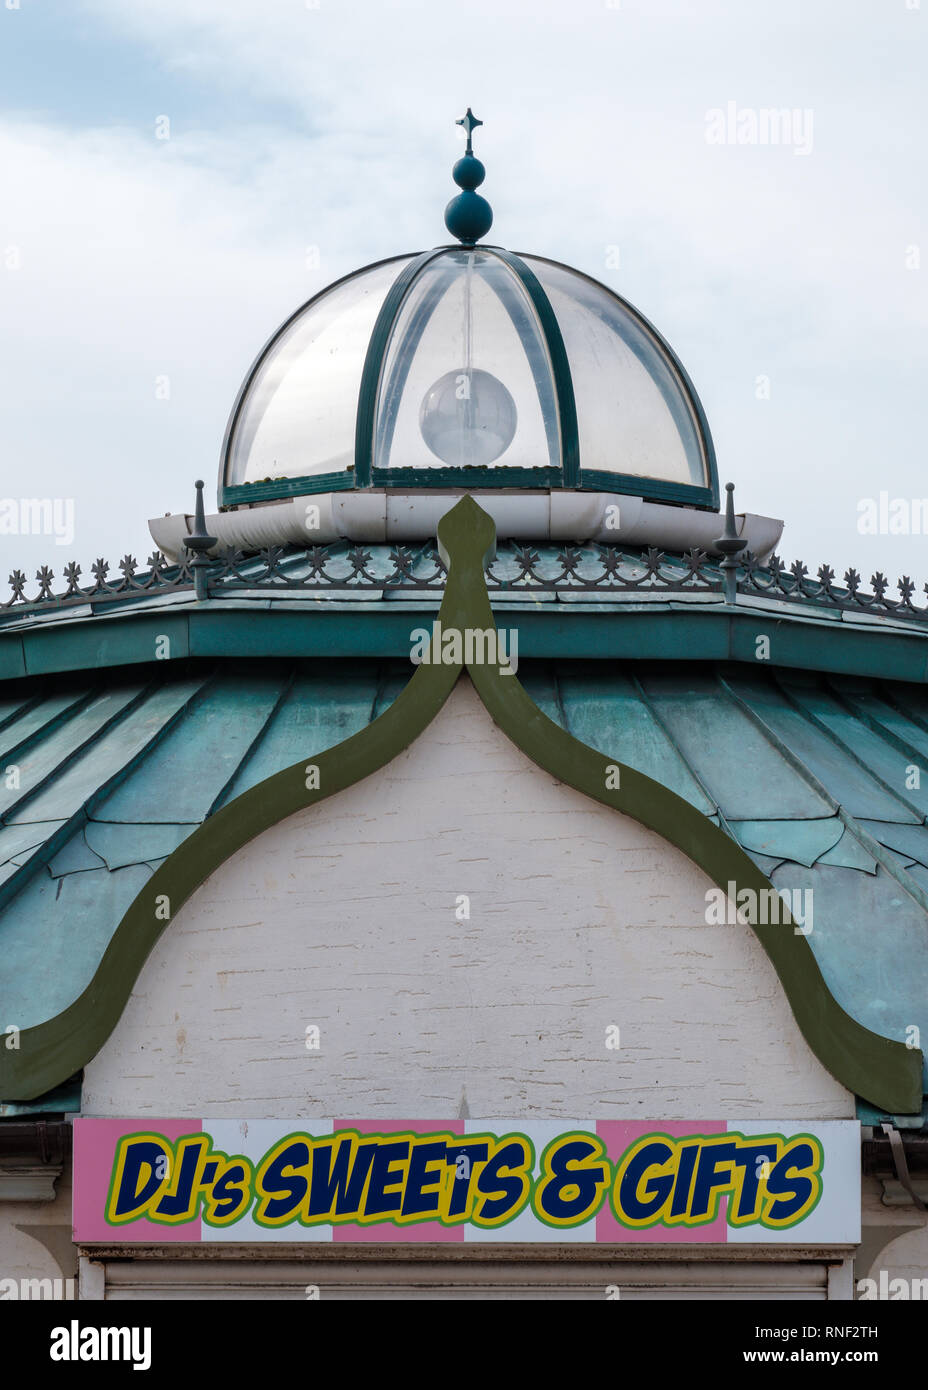 Victorian style green roof and glass dome of a building in Rhyl's Children's Village on a cloudy day, Rhyl, Denbighshire, North Wales Stock Photo